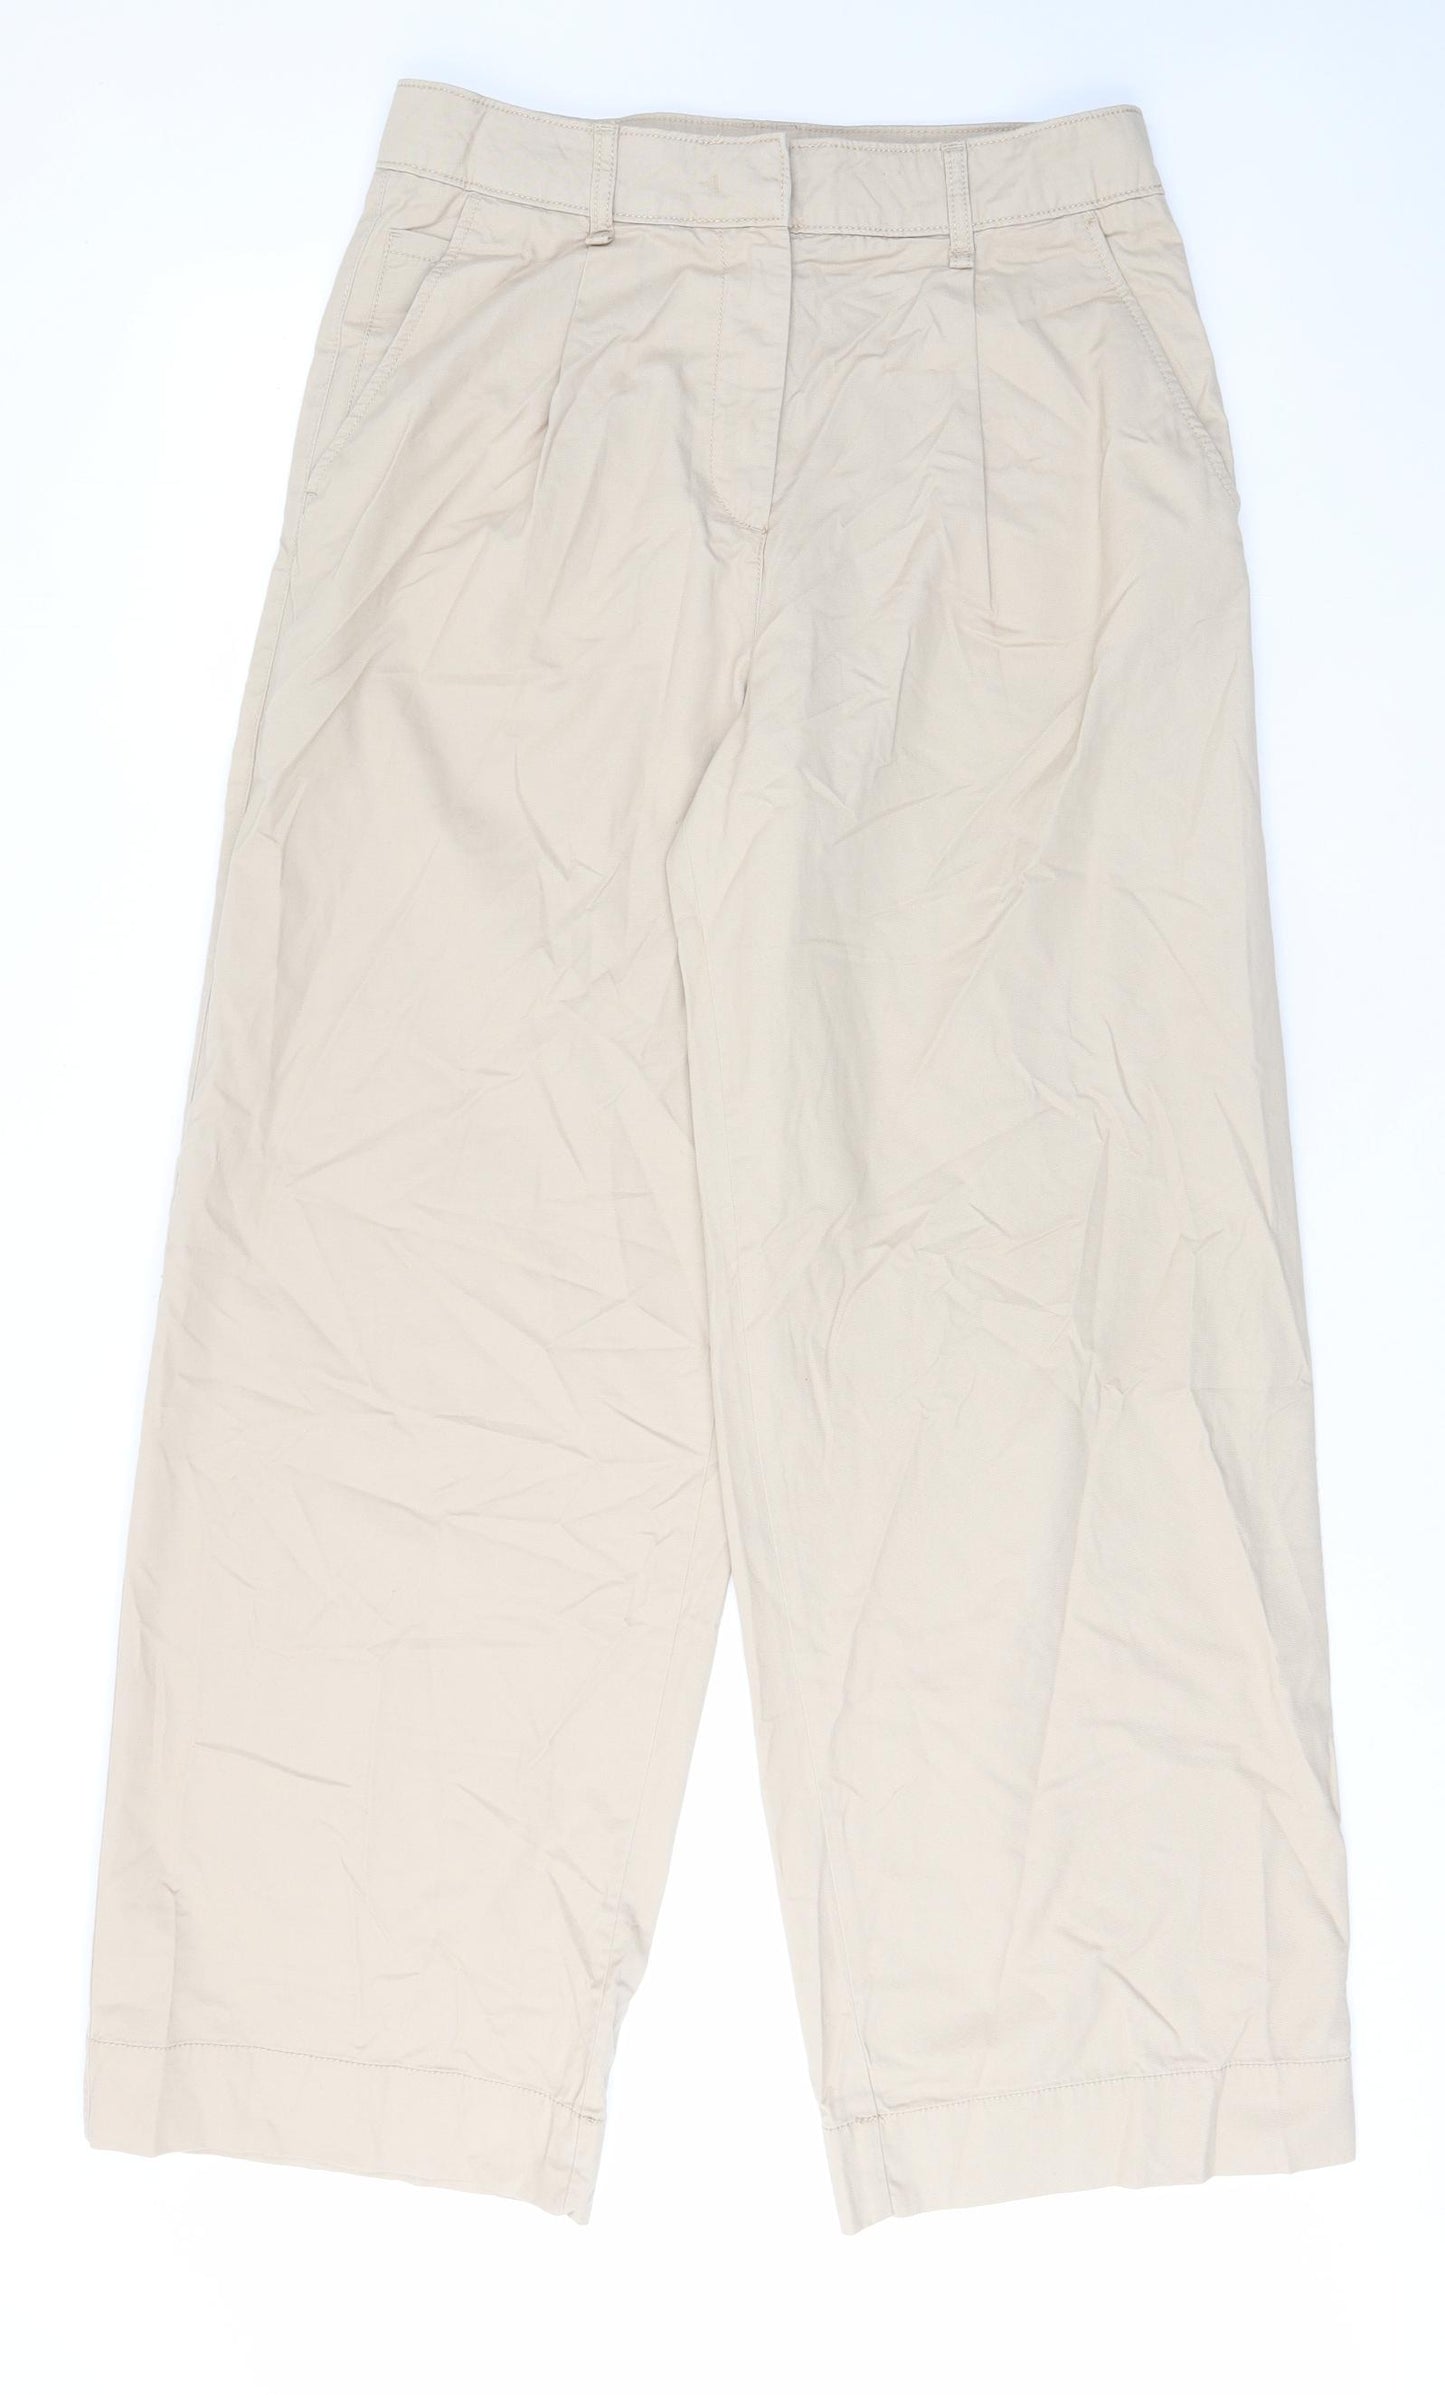 Marks and Spencer Womens Beige Cotton Trousers Size 14 L32 in Regular Hook & Eye - Pockets, Belt Loops, Pleated